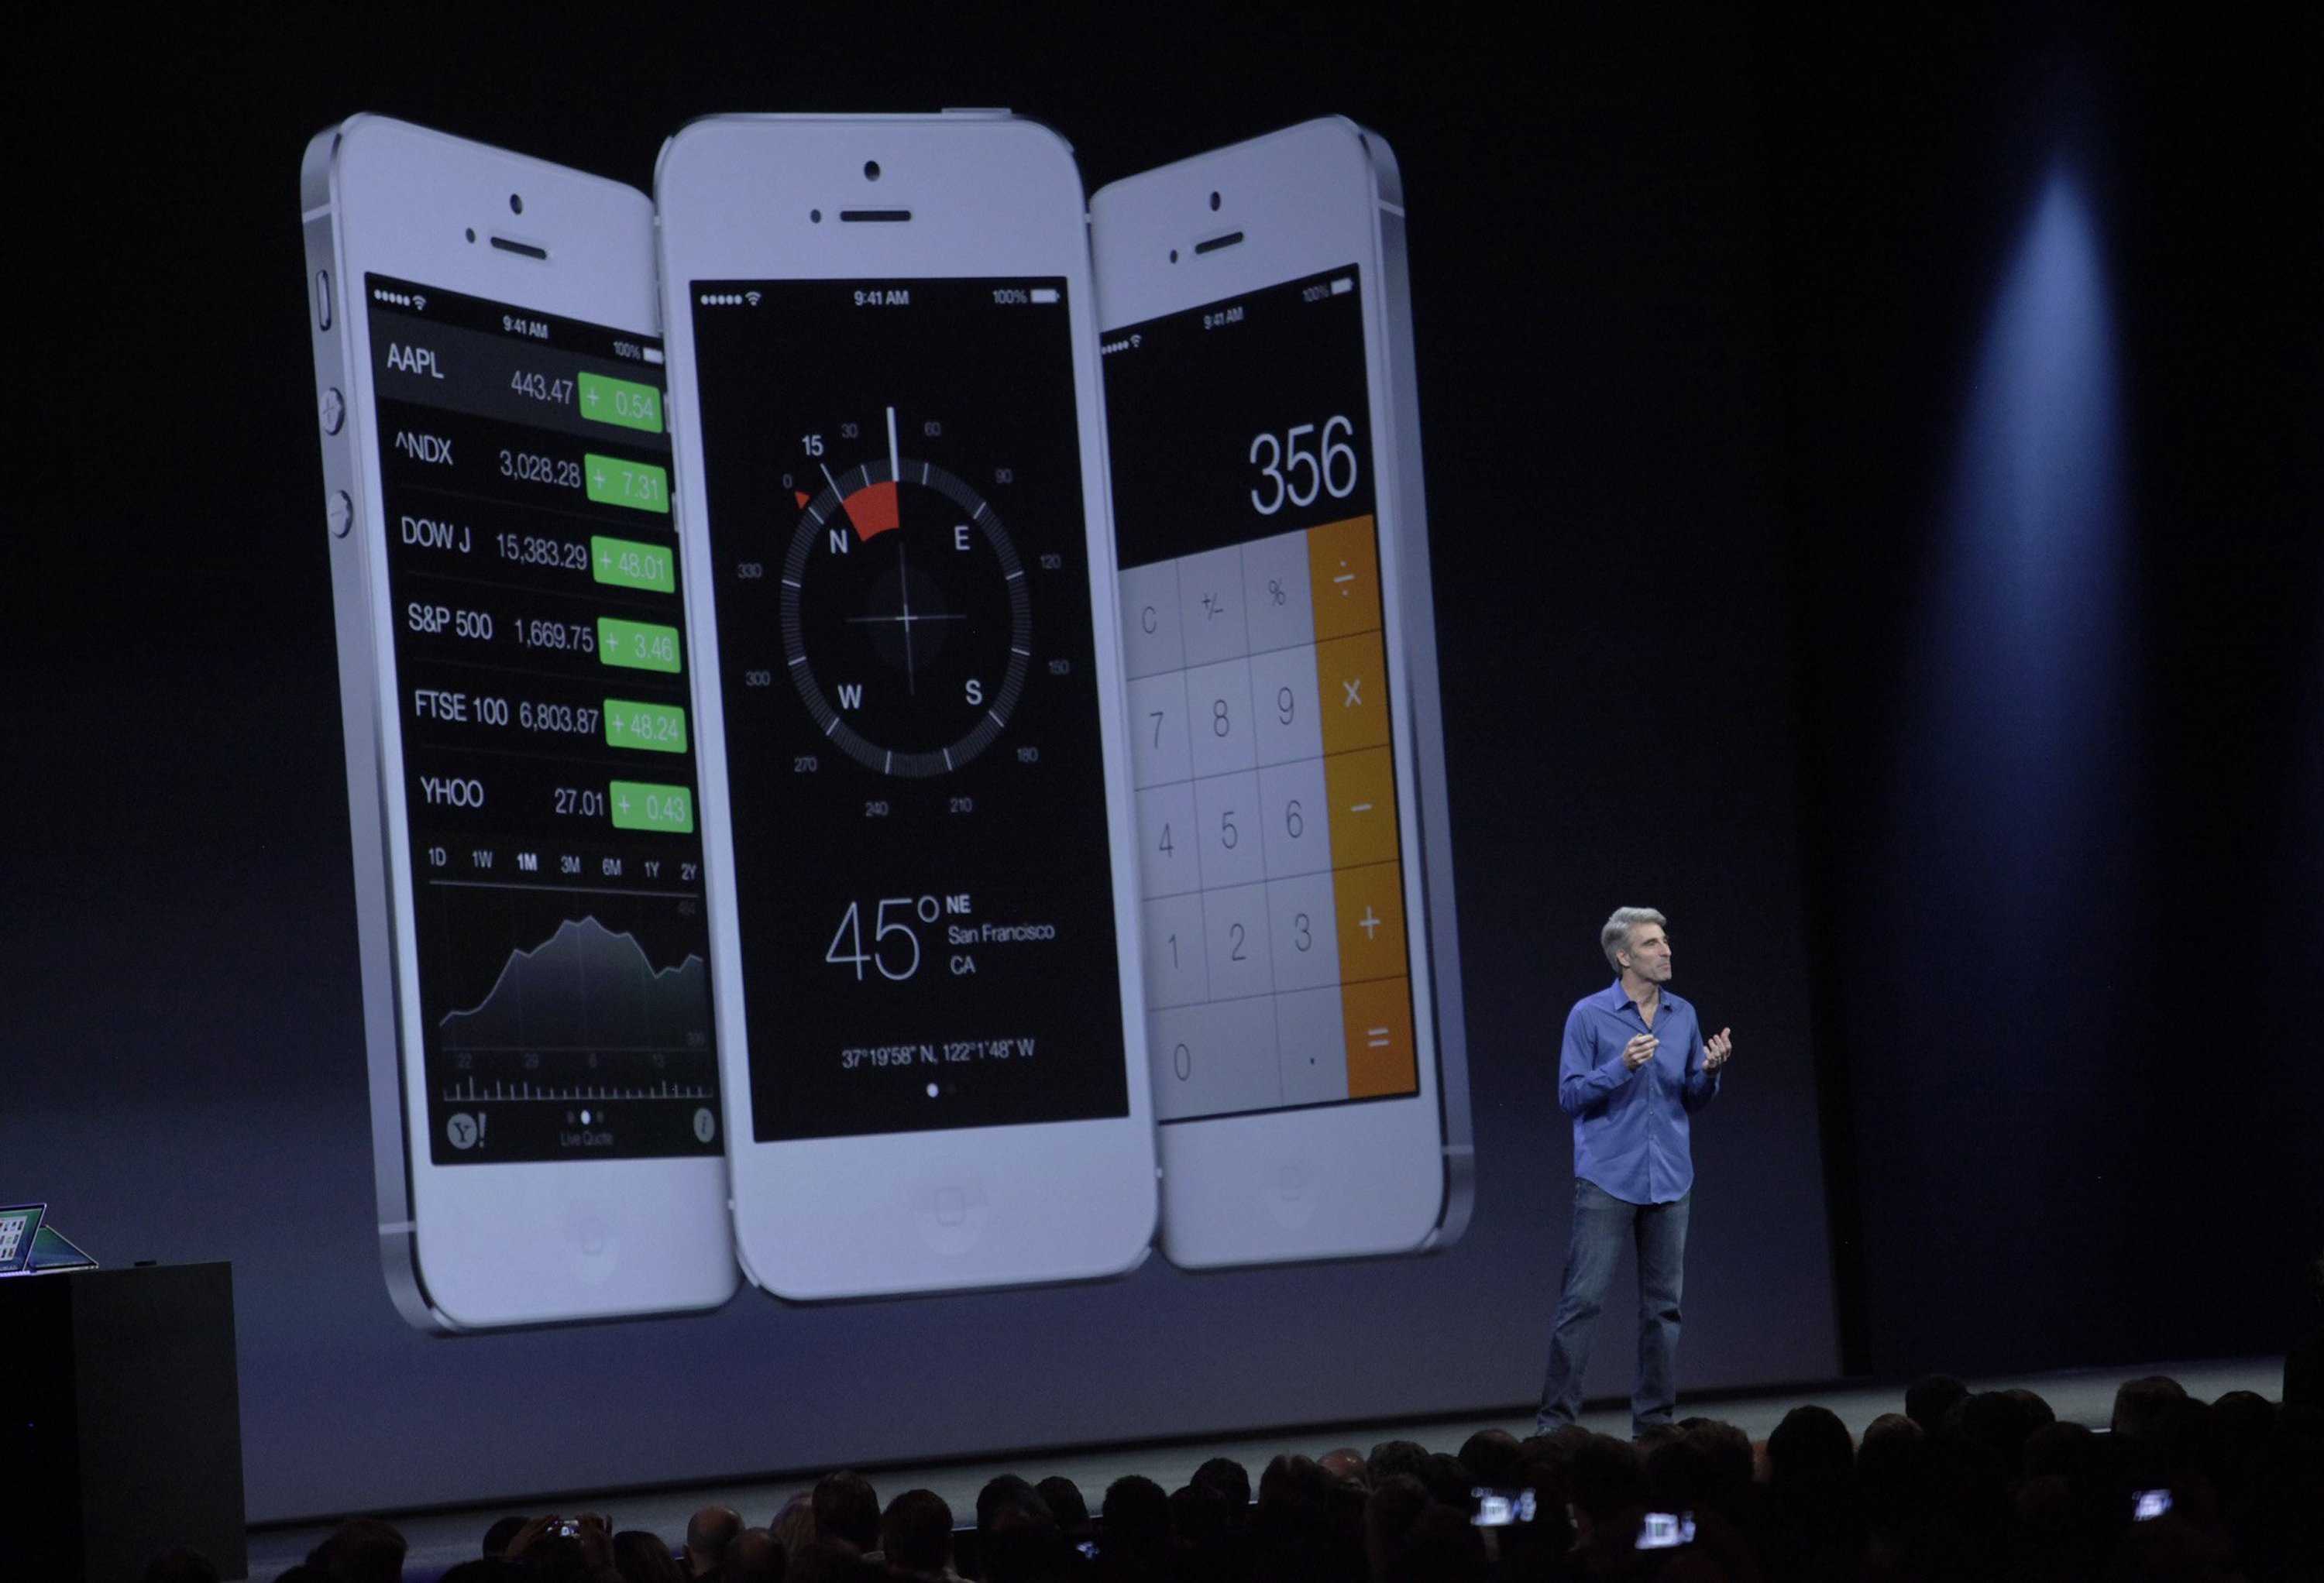 Craig Federighi, senior vice president of software engineering for Apple, presents new features of iOS 7 for the iPhone at the Apple Worldwide Developers Conference in San Francisco, California, Monday, June 10, 2013. (Gary Reyes/Bay Area News Group/MCT)